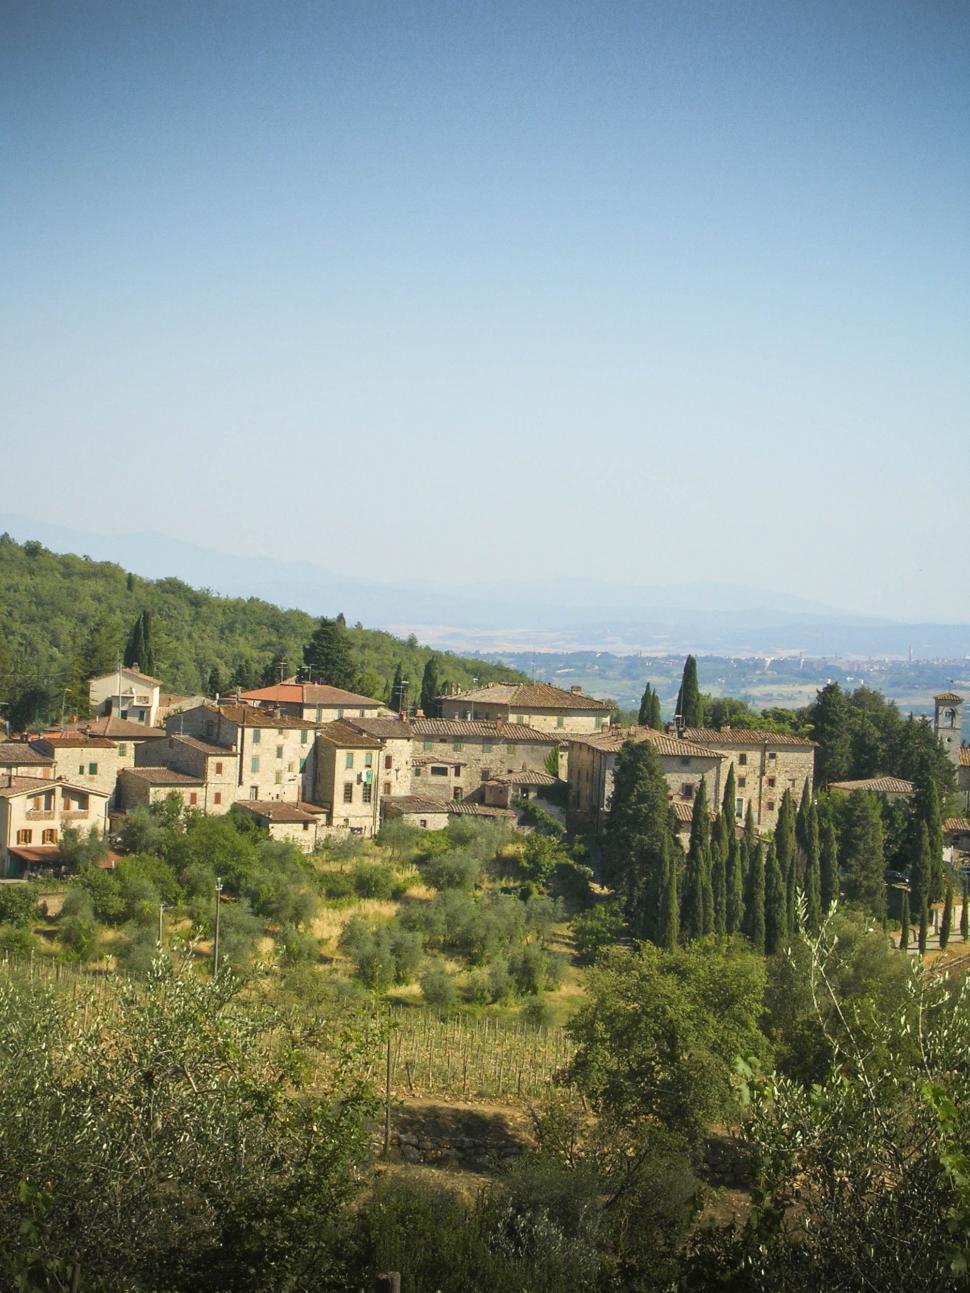 Download Free Stock Photo of tuscany village 